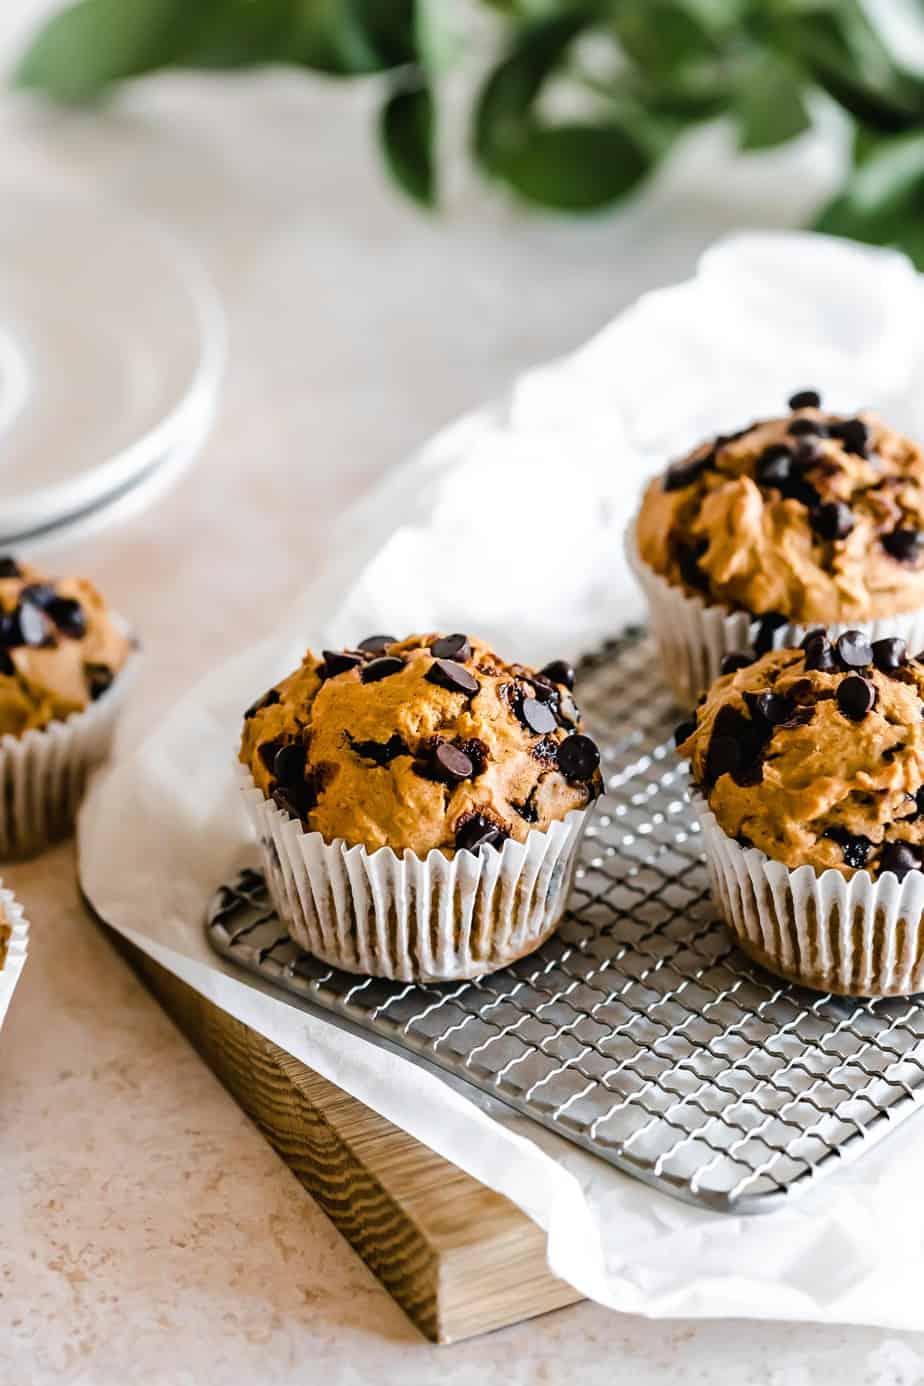 Muffins on a metal cooling tray.